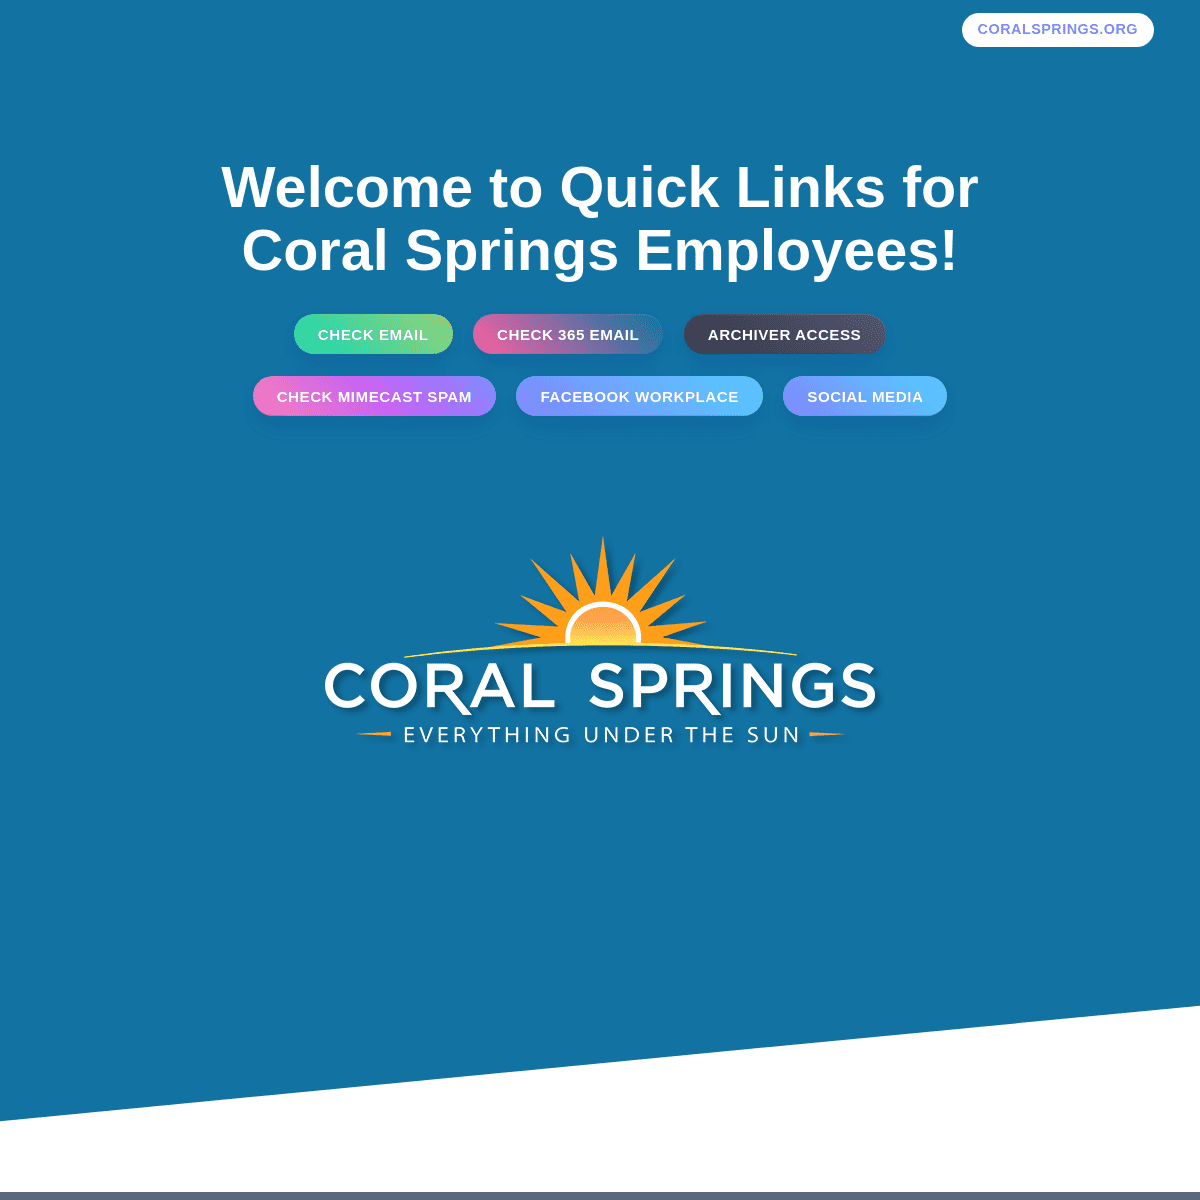 Coral Springs Quick Links for Employees